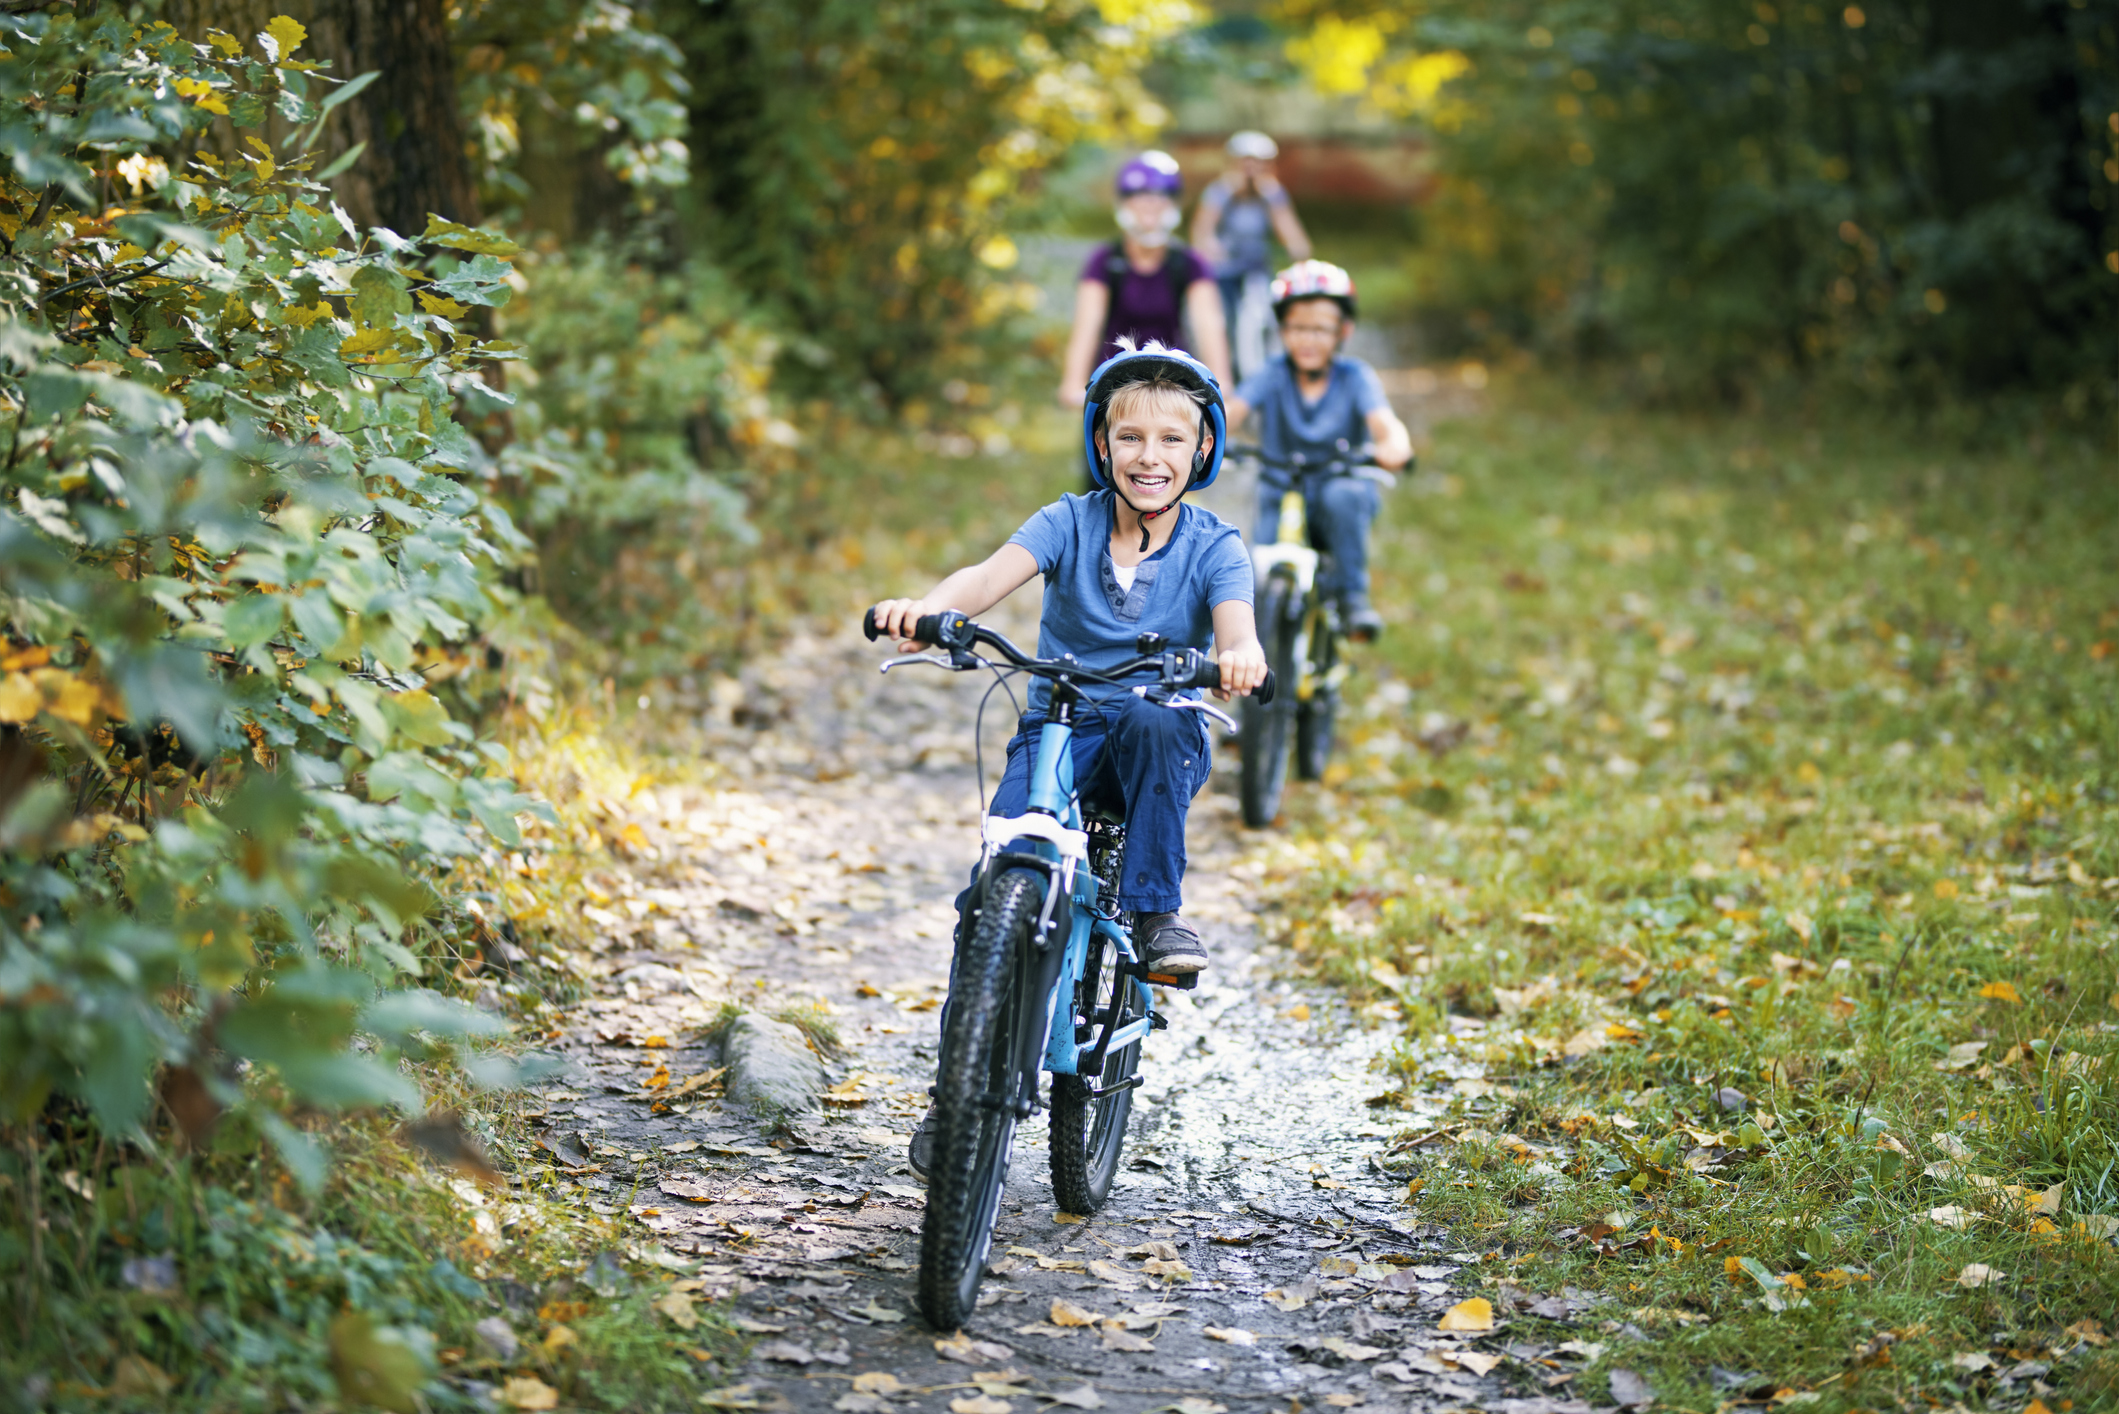 Little boy and his family riding bicycles in nature. The boy is smiling happily.Nikon D810